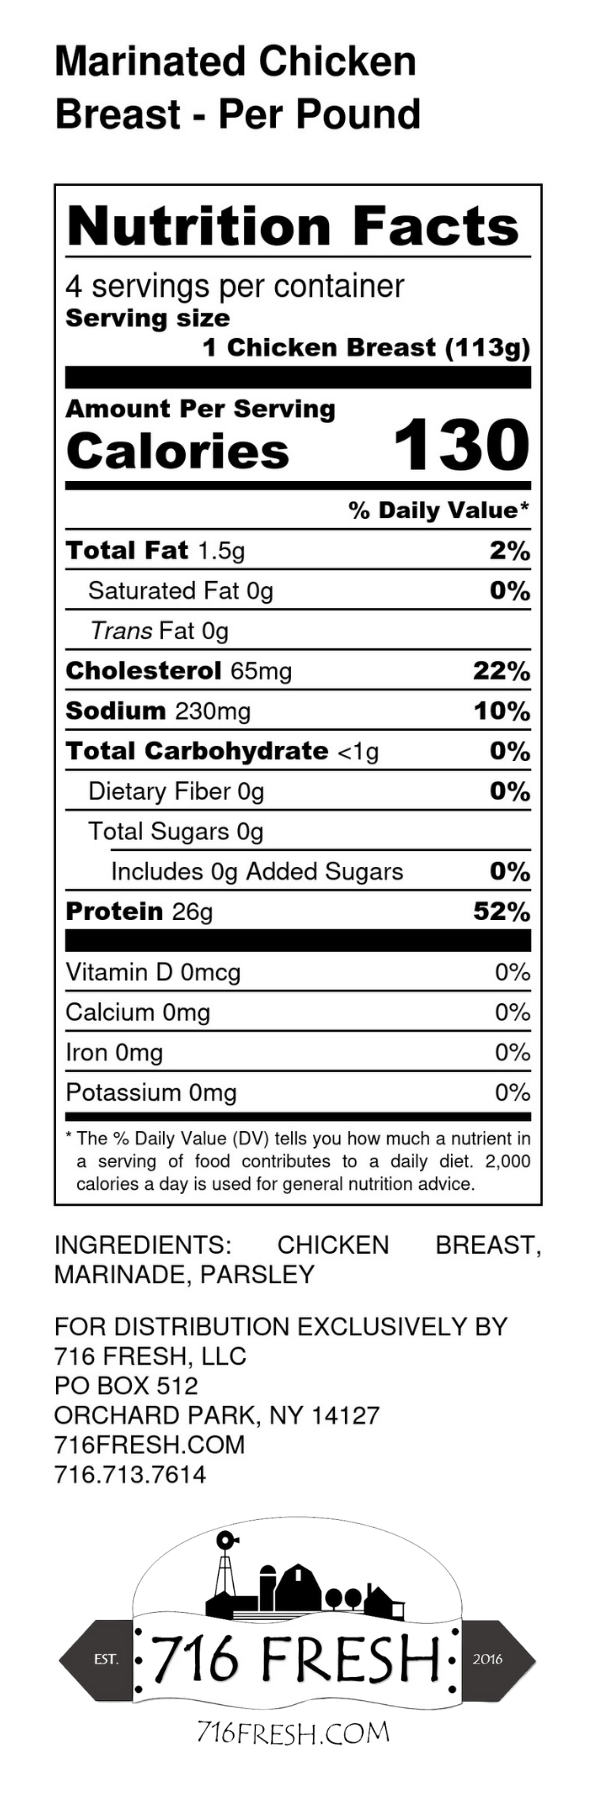 Marinated Chicken Breast - Per Pound Nutrition Facts